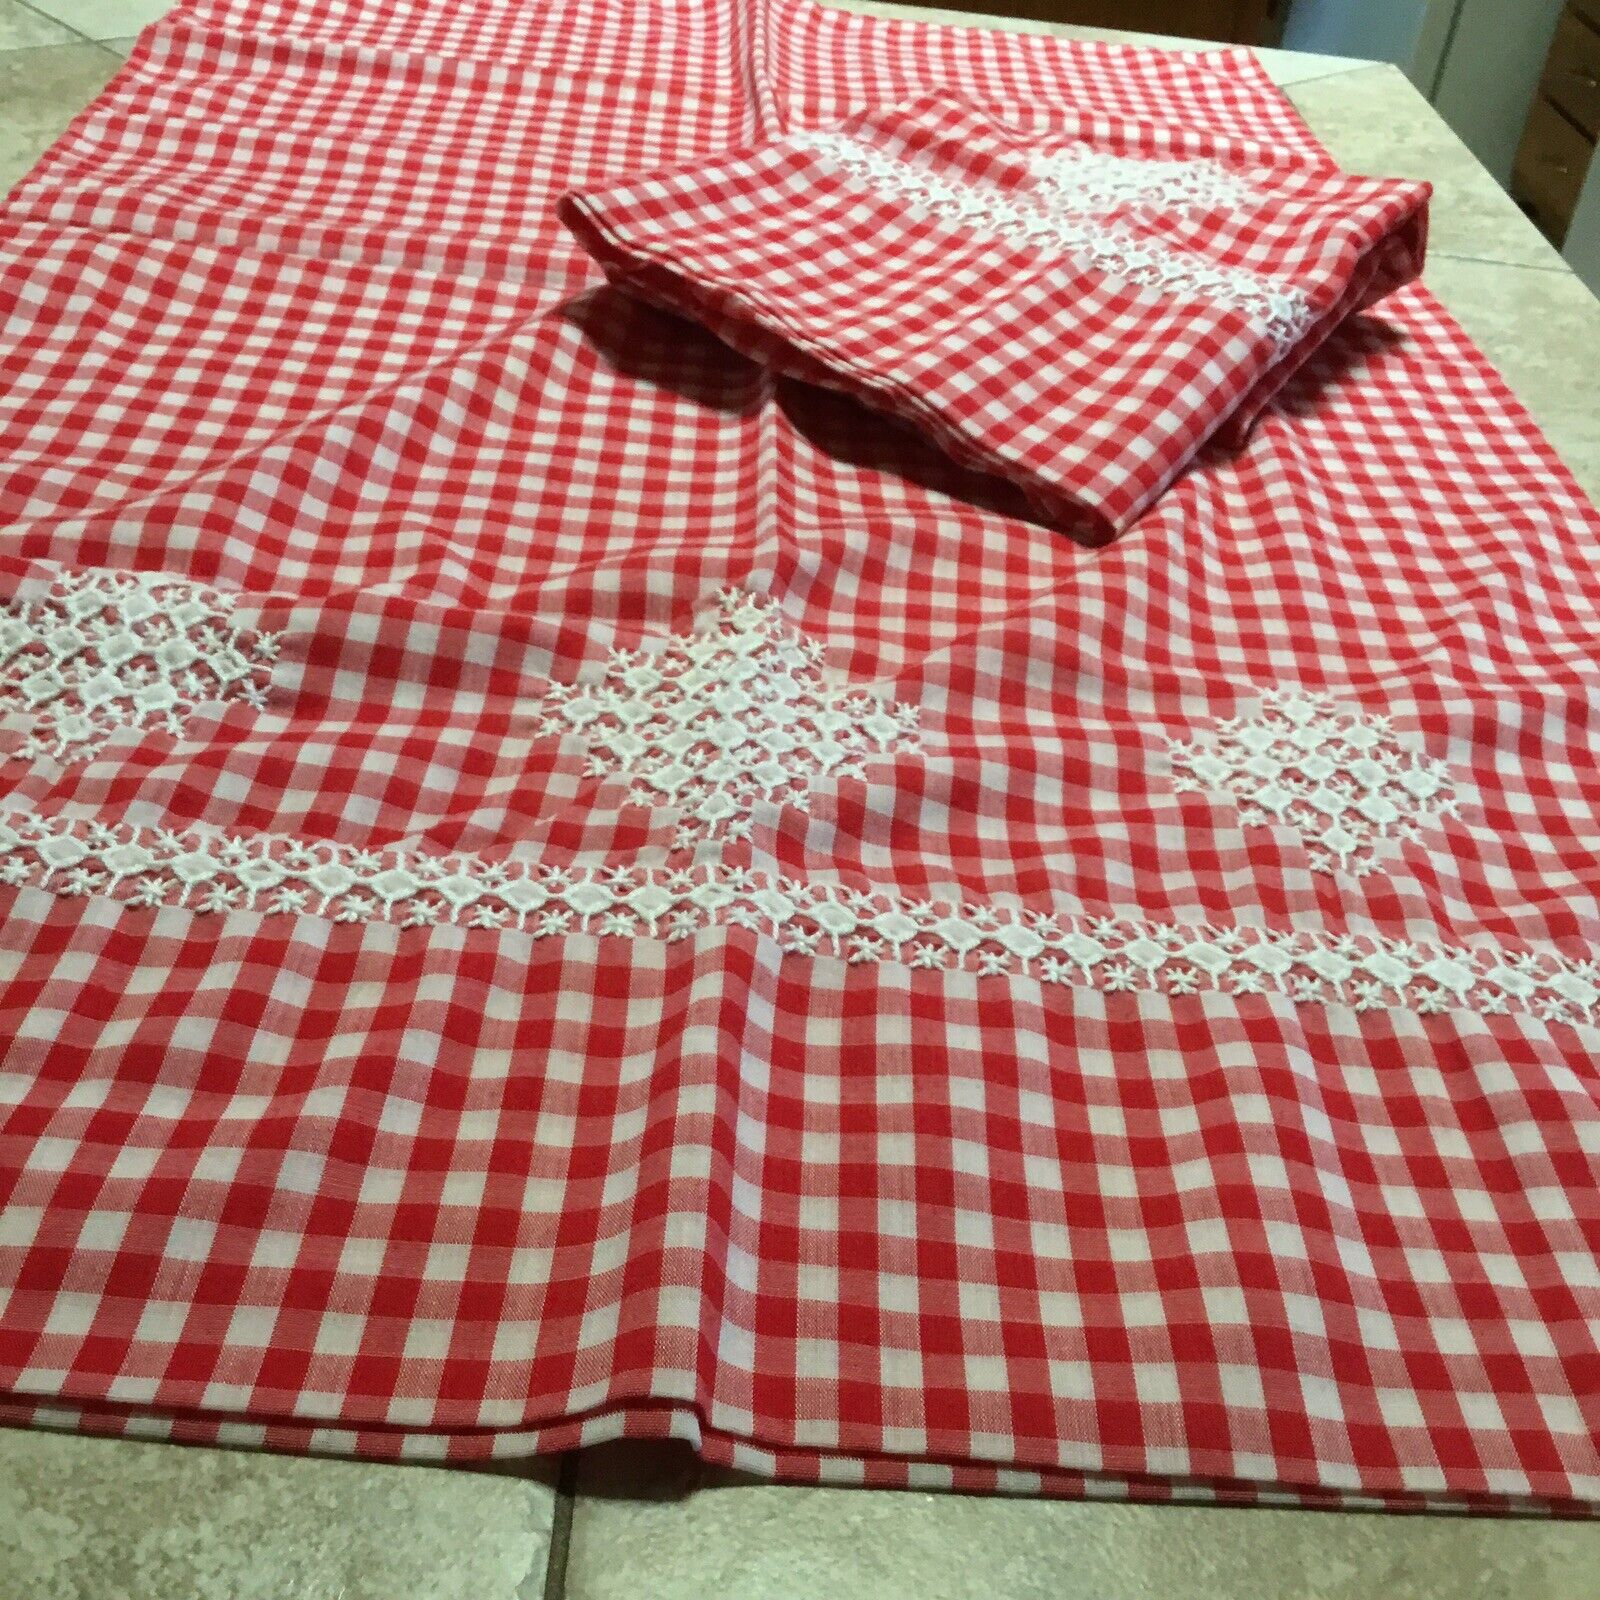 PAIR  RED AND WHITE GINGHAM PILLOWCASES With CHICKEN SCRATCH EMBROIDERY